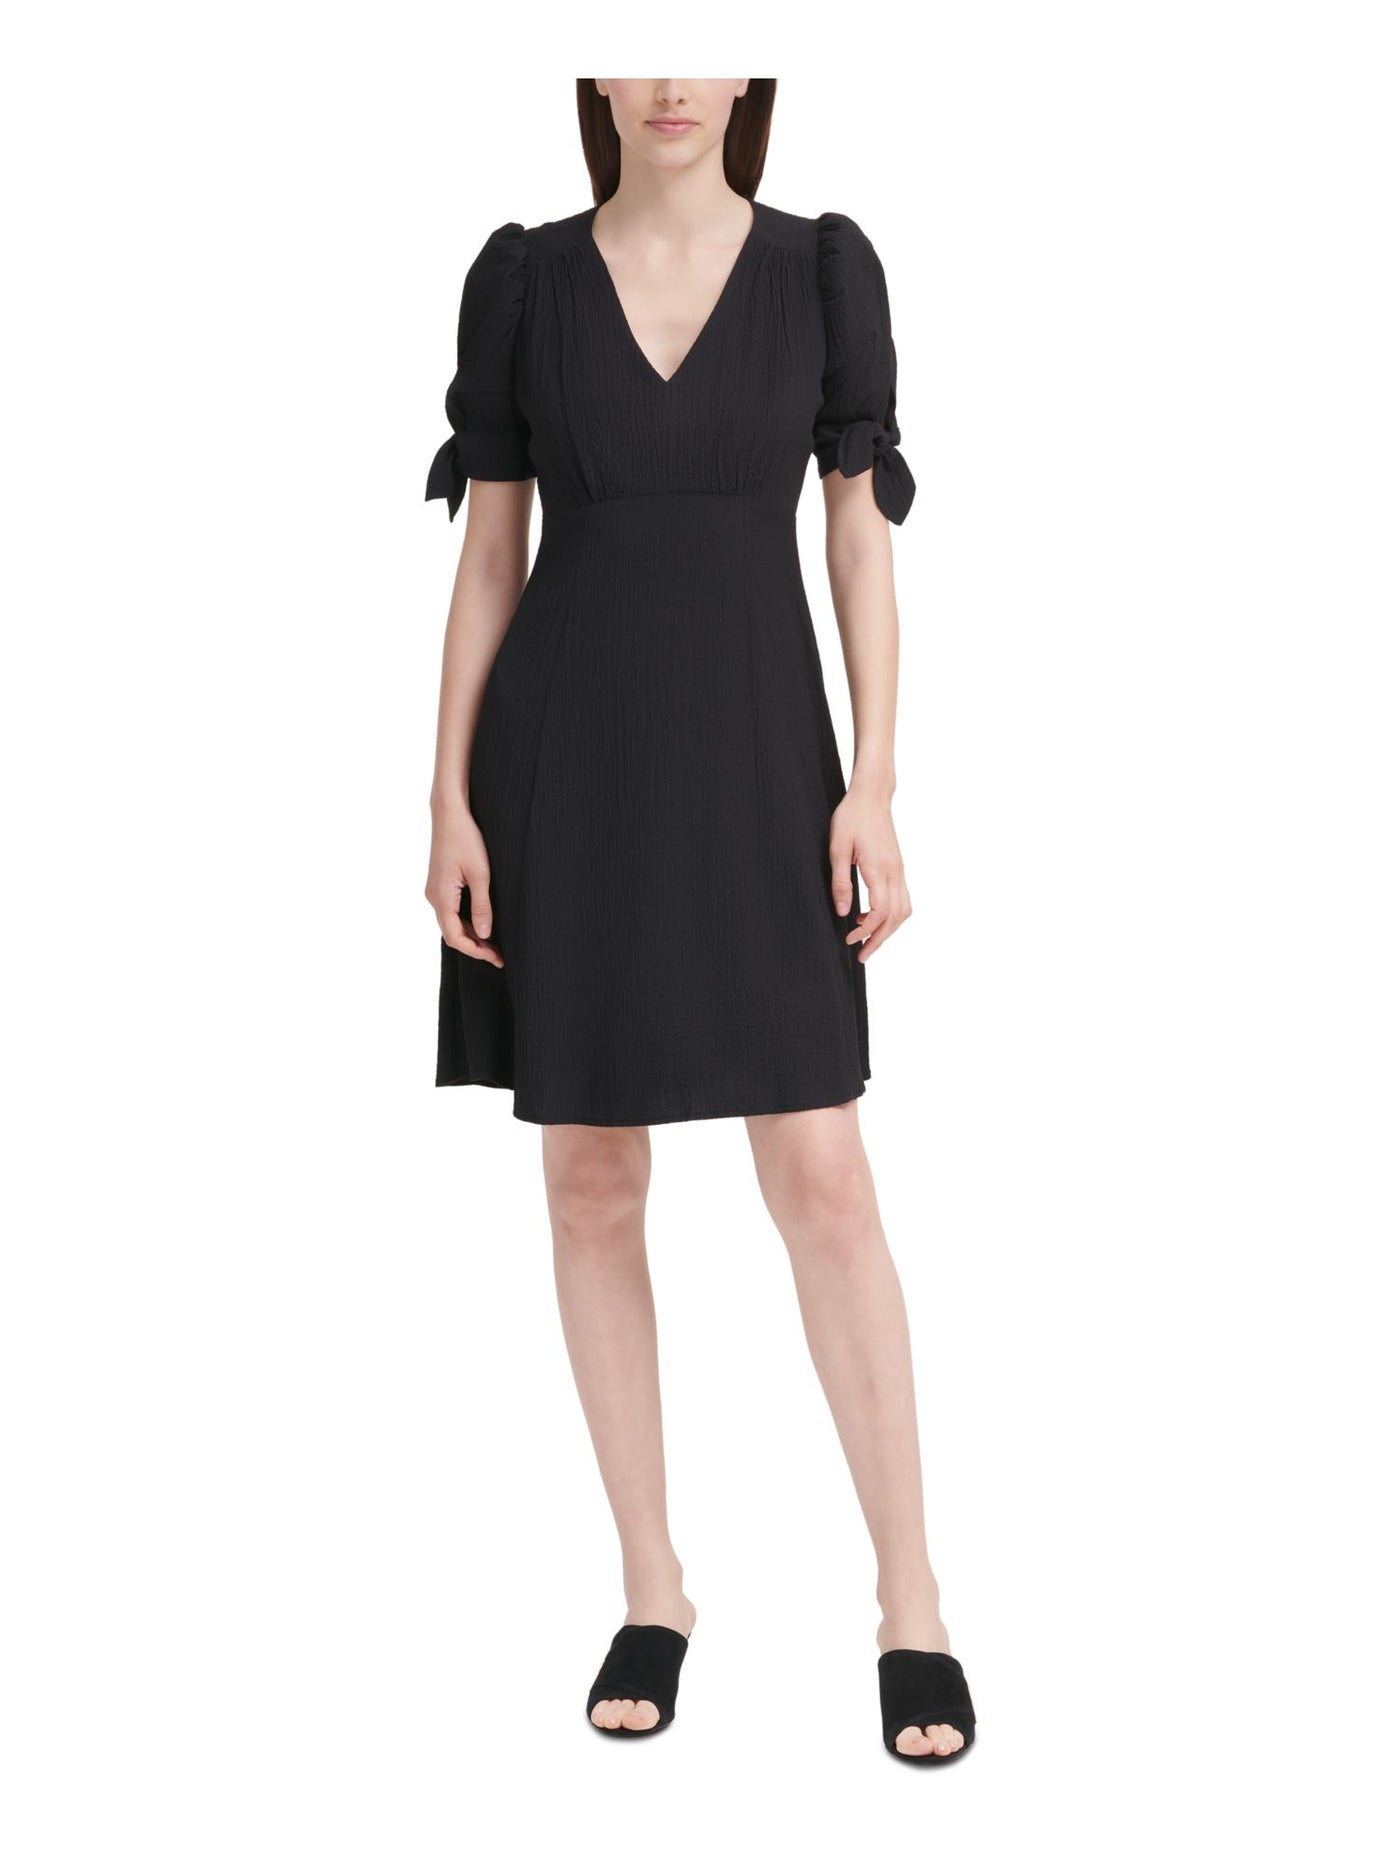 CALVIN KLEIN Womens Black Zippered Tie Sleeves Elbow Sleeve V Neck Above The Knee Wear To Work A-Line Dress 2